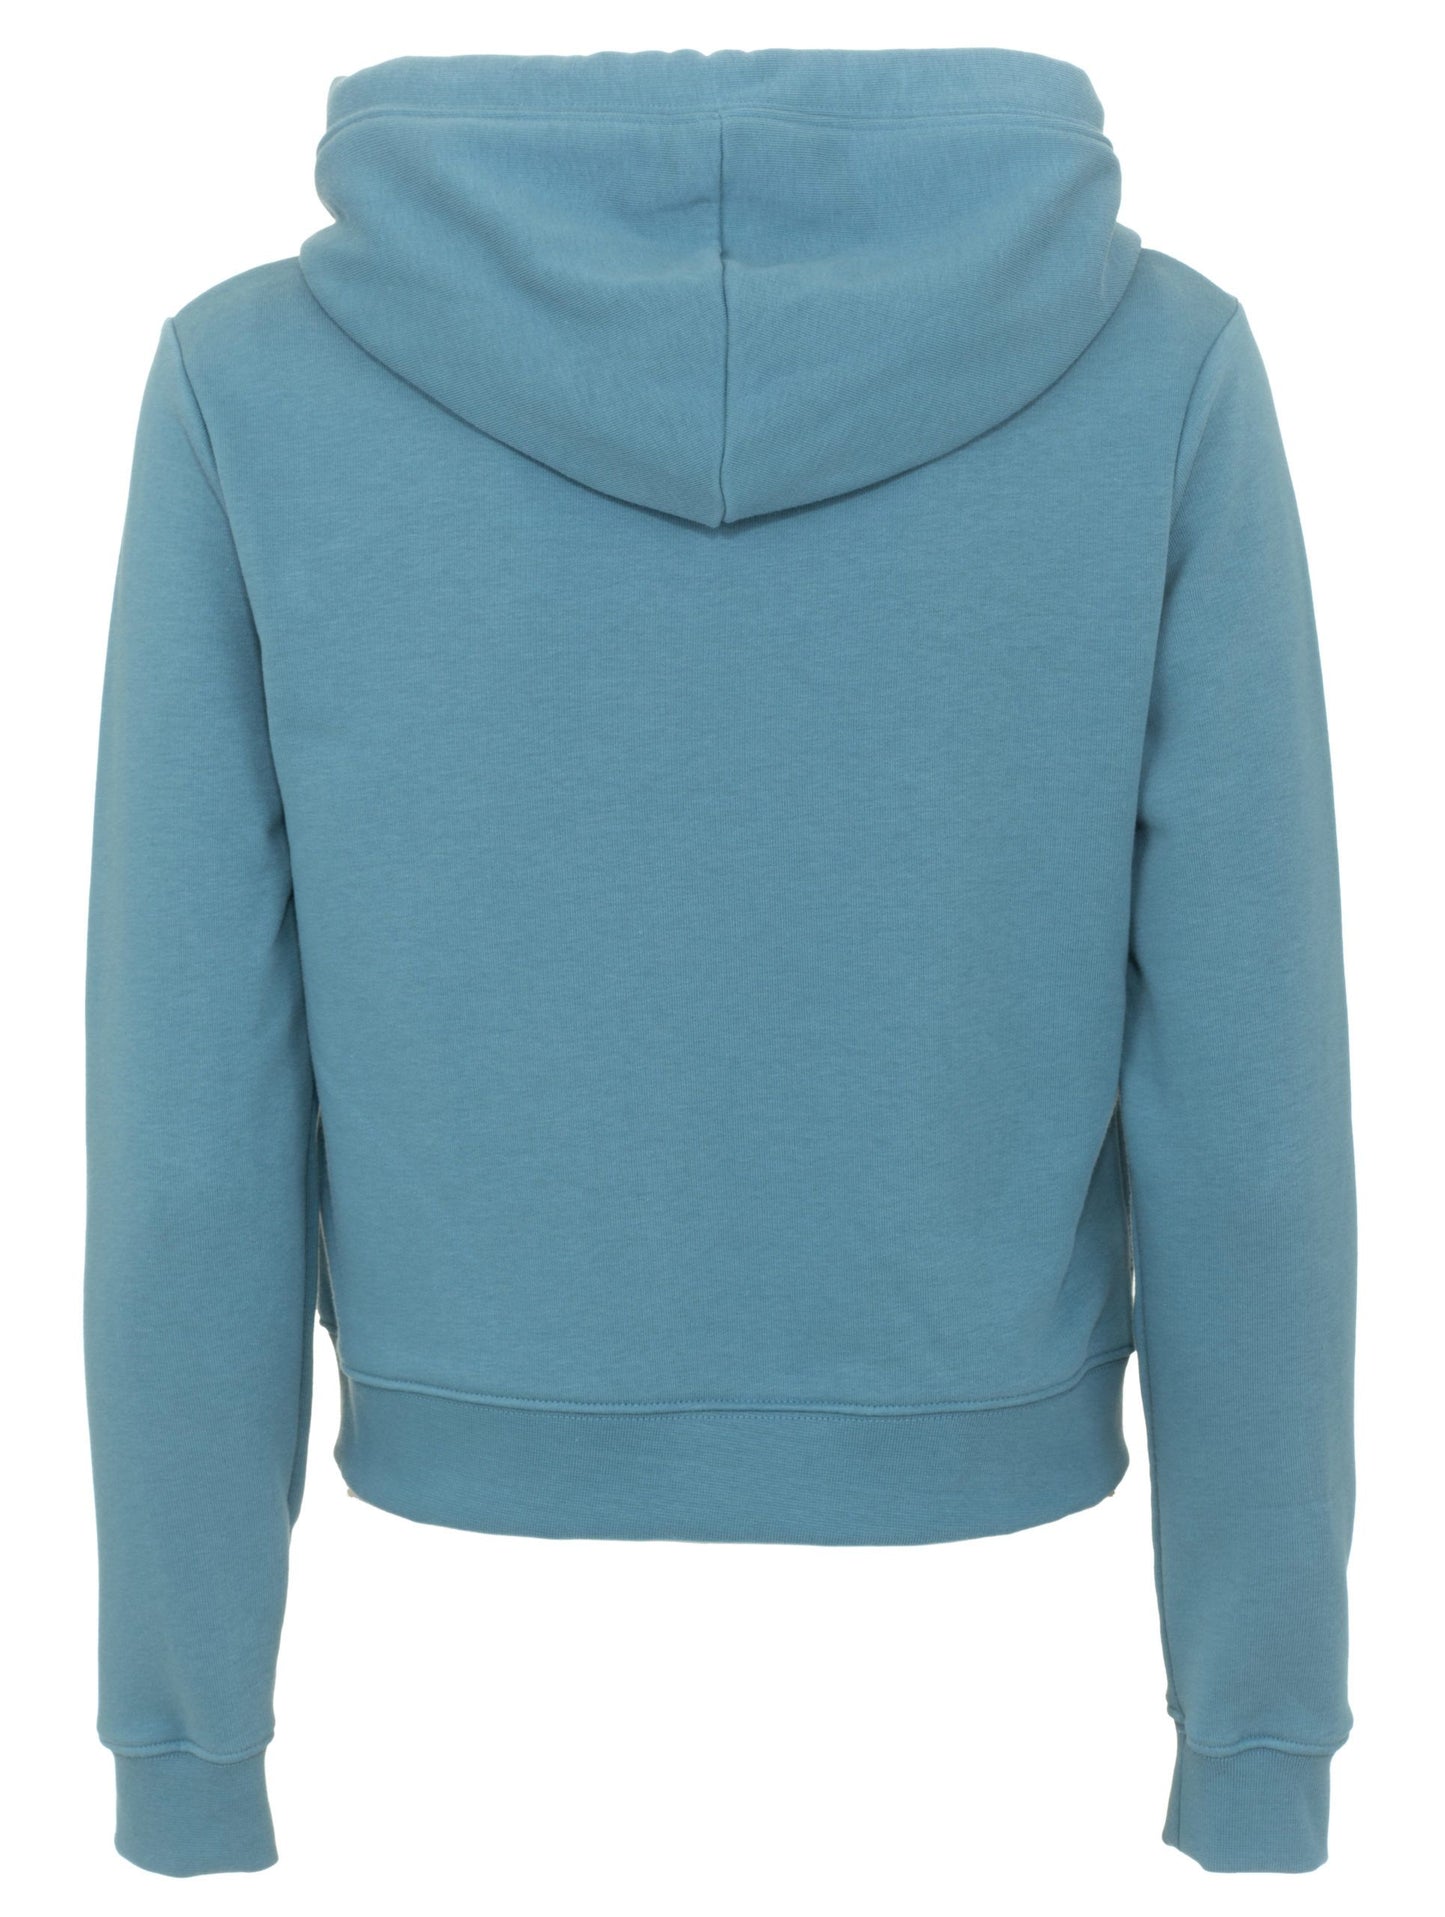 Imperfect Light Blue Cotton Sweater